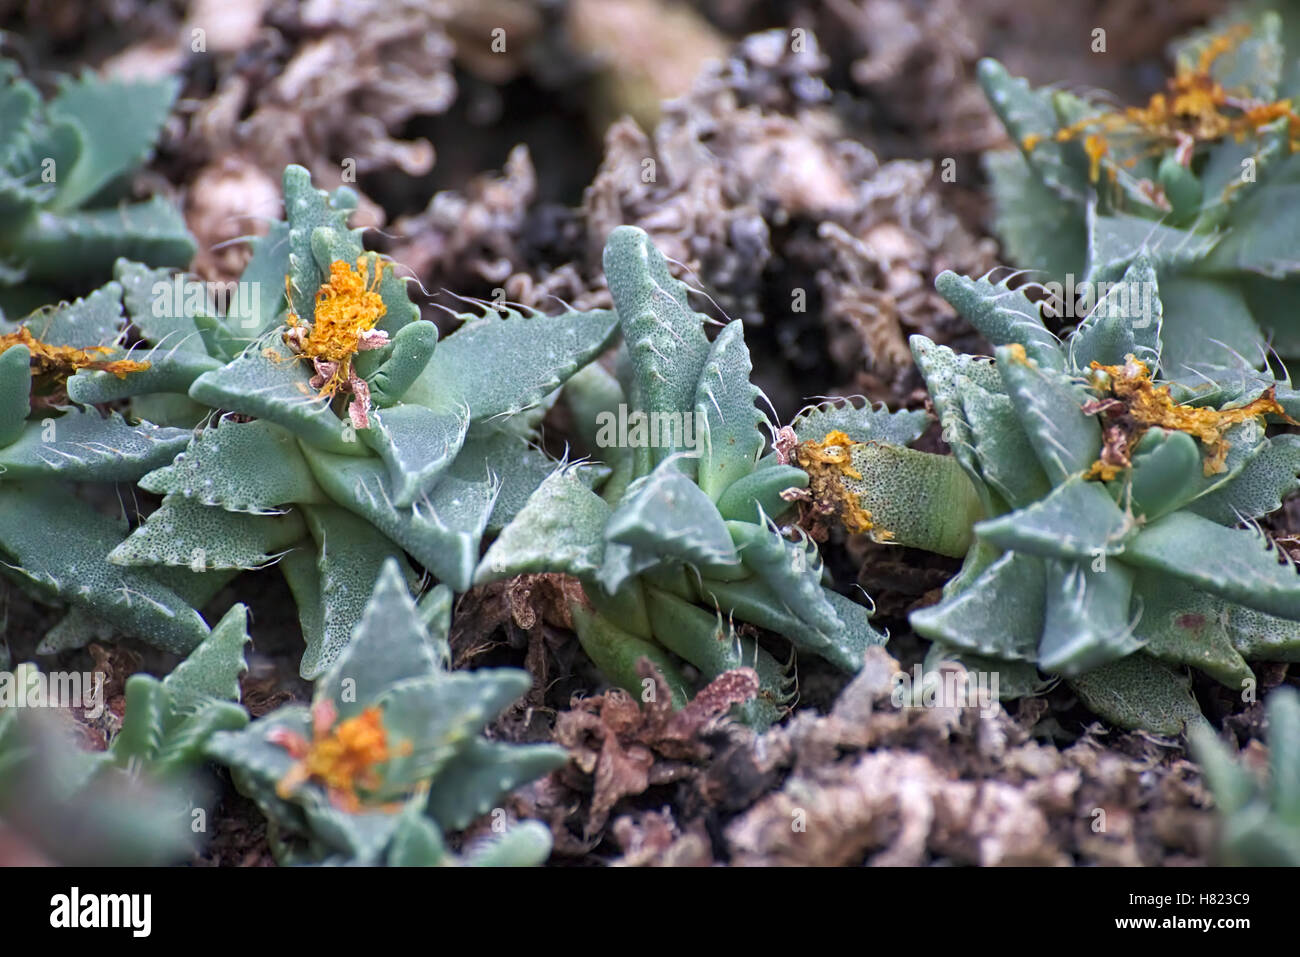 The succulent plant Faucaria bosscheana with blossoms. Stock Photo